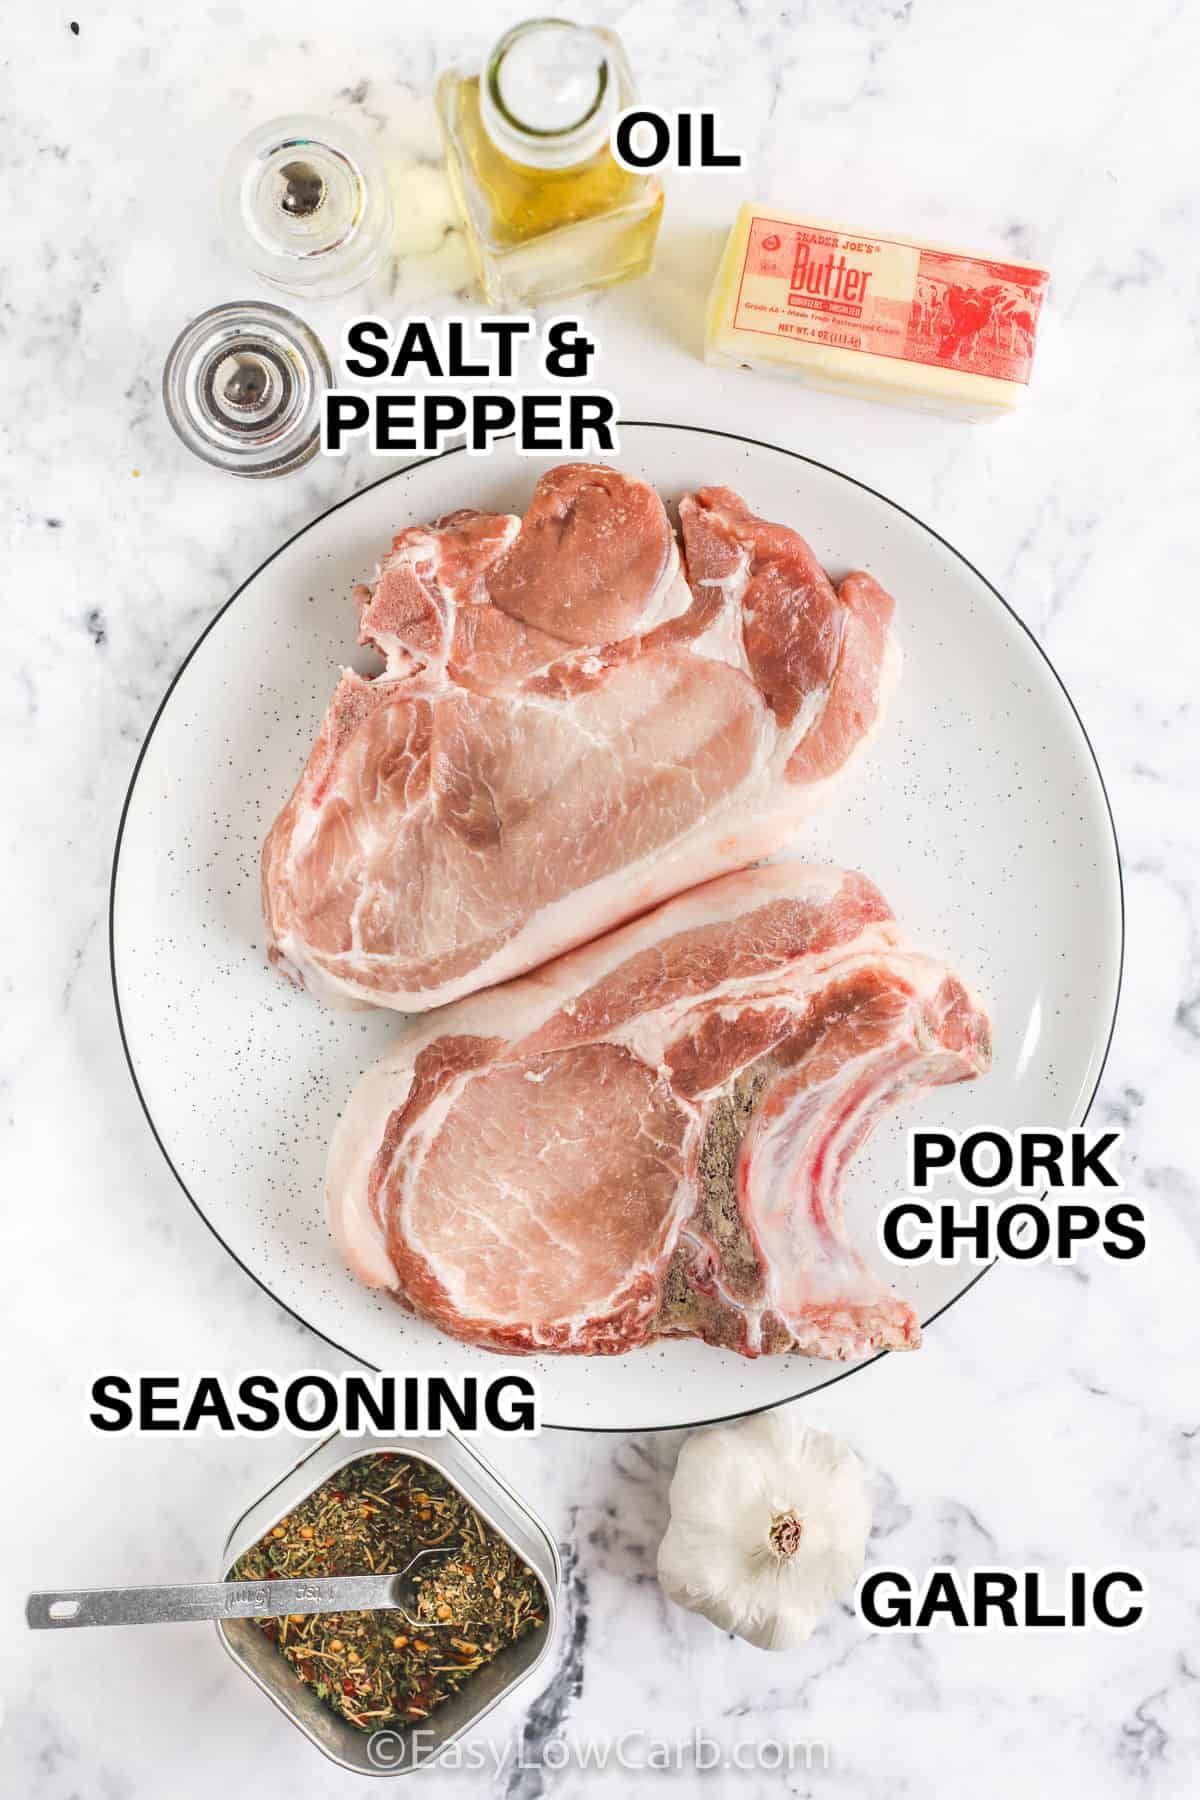 raw pork chops, garlic, seasoning, salt and pepper , oil and butter to make Creamy Skillet Pork Chops with labels